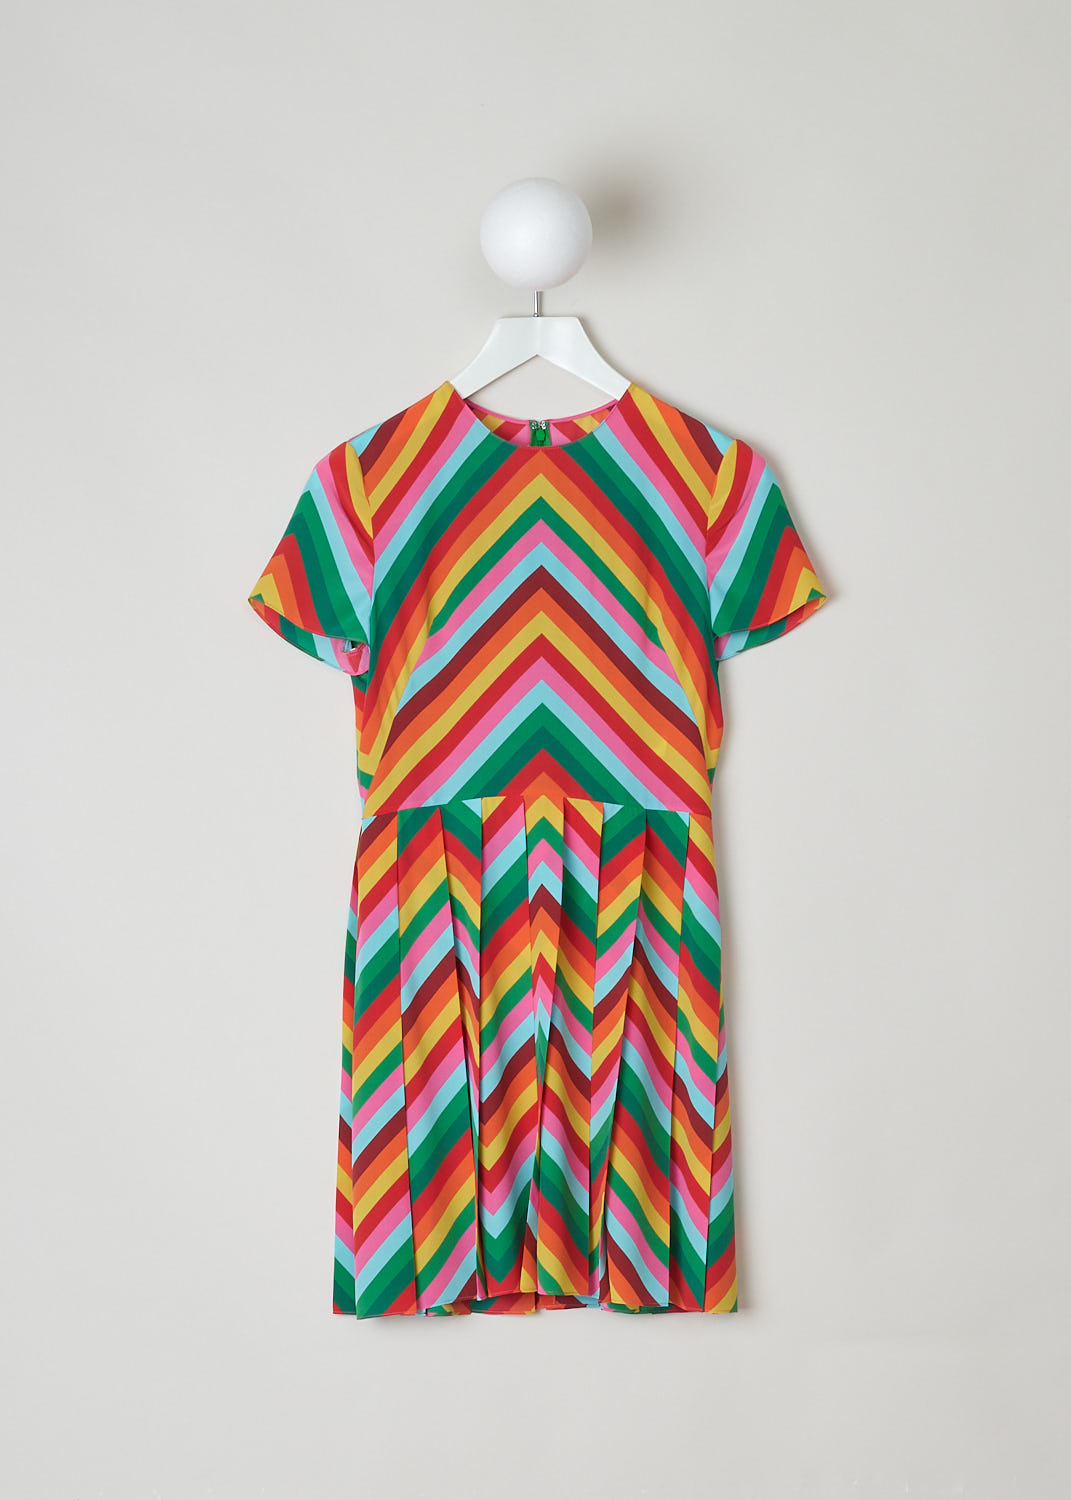 VALENTINO, MULTICOLORED ZIGZAG PRINT DRESS, XB3VAY7170Q_M12, Print, Pink, Orange, Front, This short sleeve dress has a multicolored diagonal striped pattern. The dress has a round neckline. The form fitting bodice goed over in the knife pleated circle skirt. In the back, a concealed centre zip functions as the closure option.
